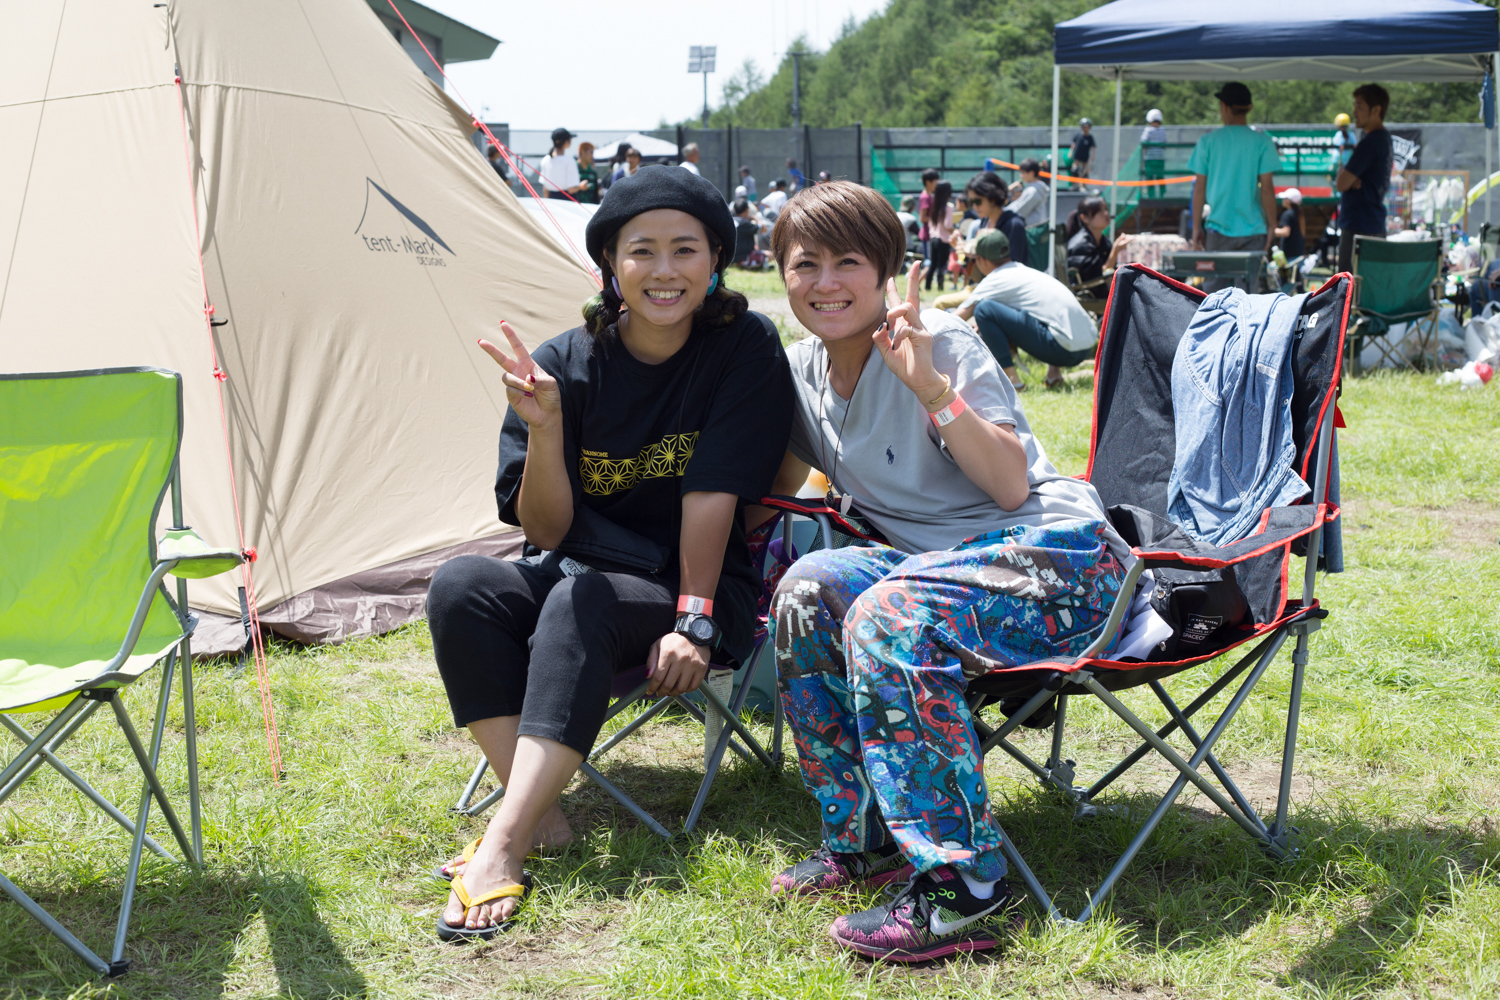 I knew Mizuho-san, Yuki-san, and Bucket Drummer Masa-san, and he was coming to this event, so we came because Gunma is a local.It was my first camp when I talked about camping with my friends.This event is much more fun because it has music, and there are various campers, so it's interesting to see it.